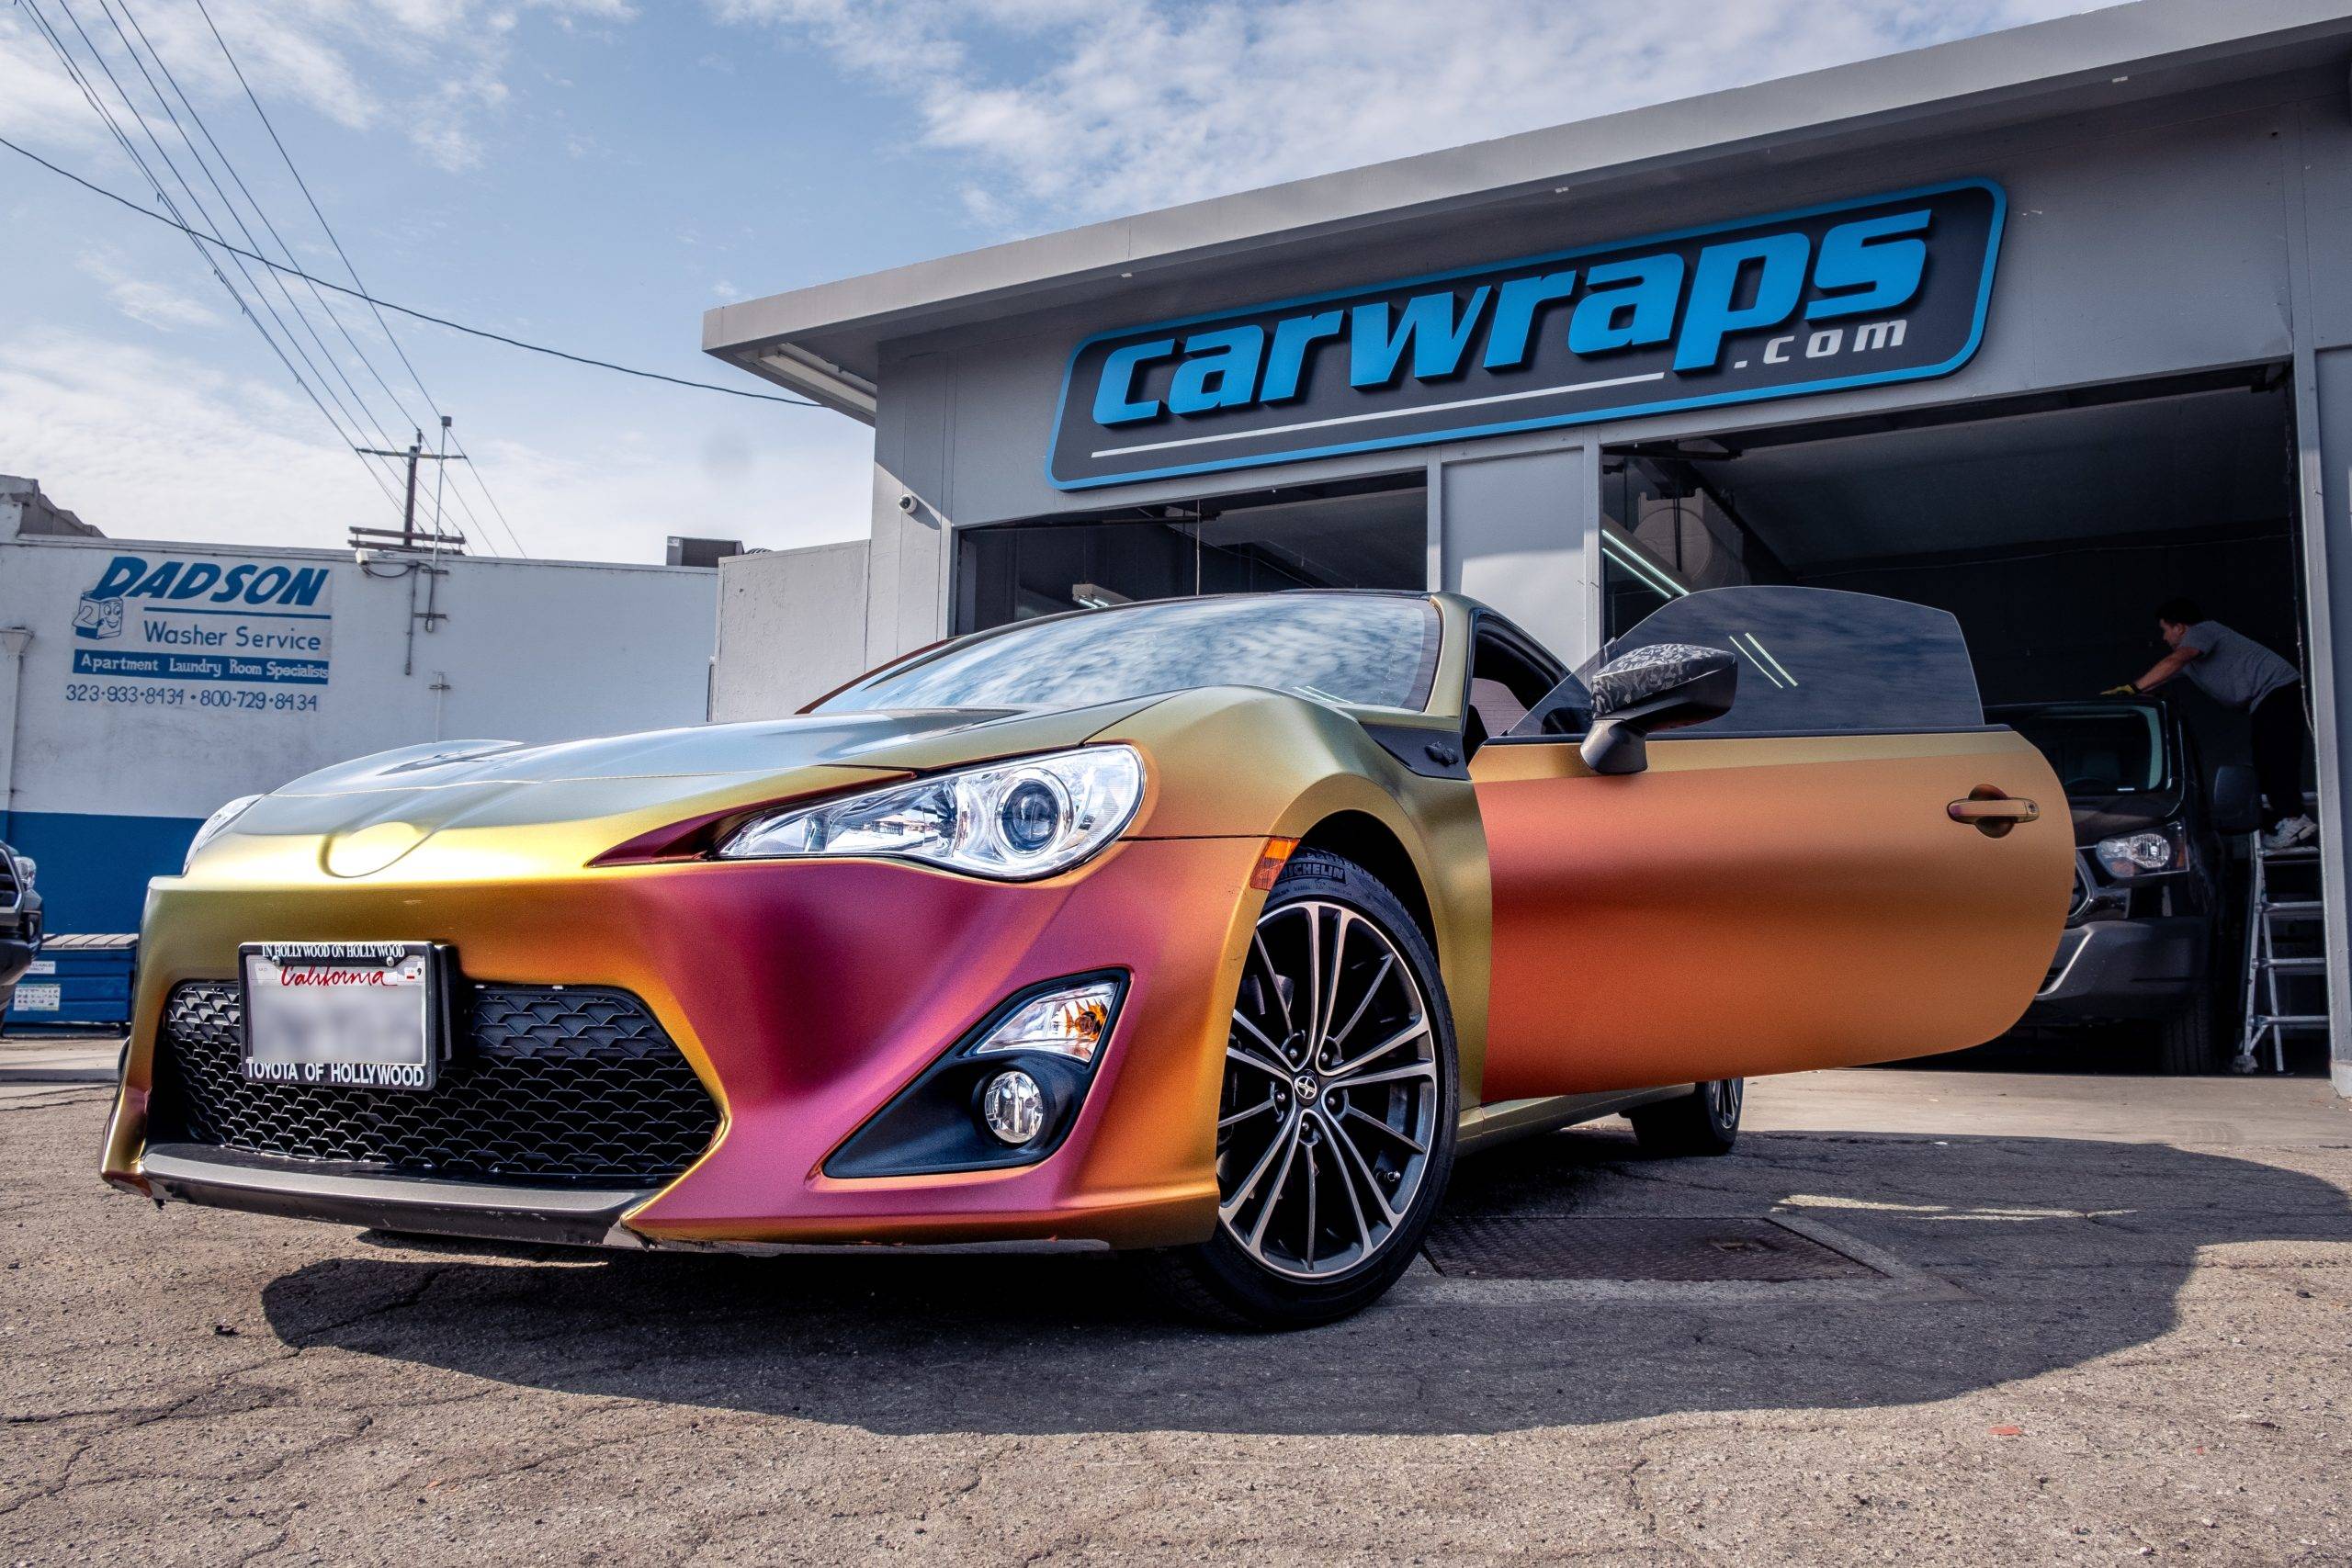 Top 4 car wrapping trends for 2020